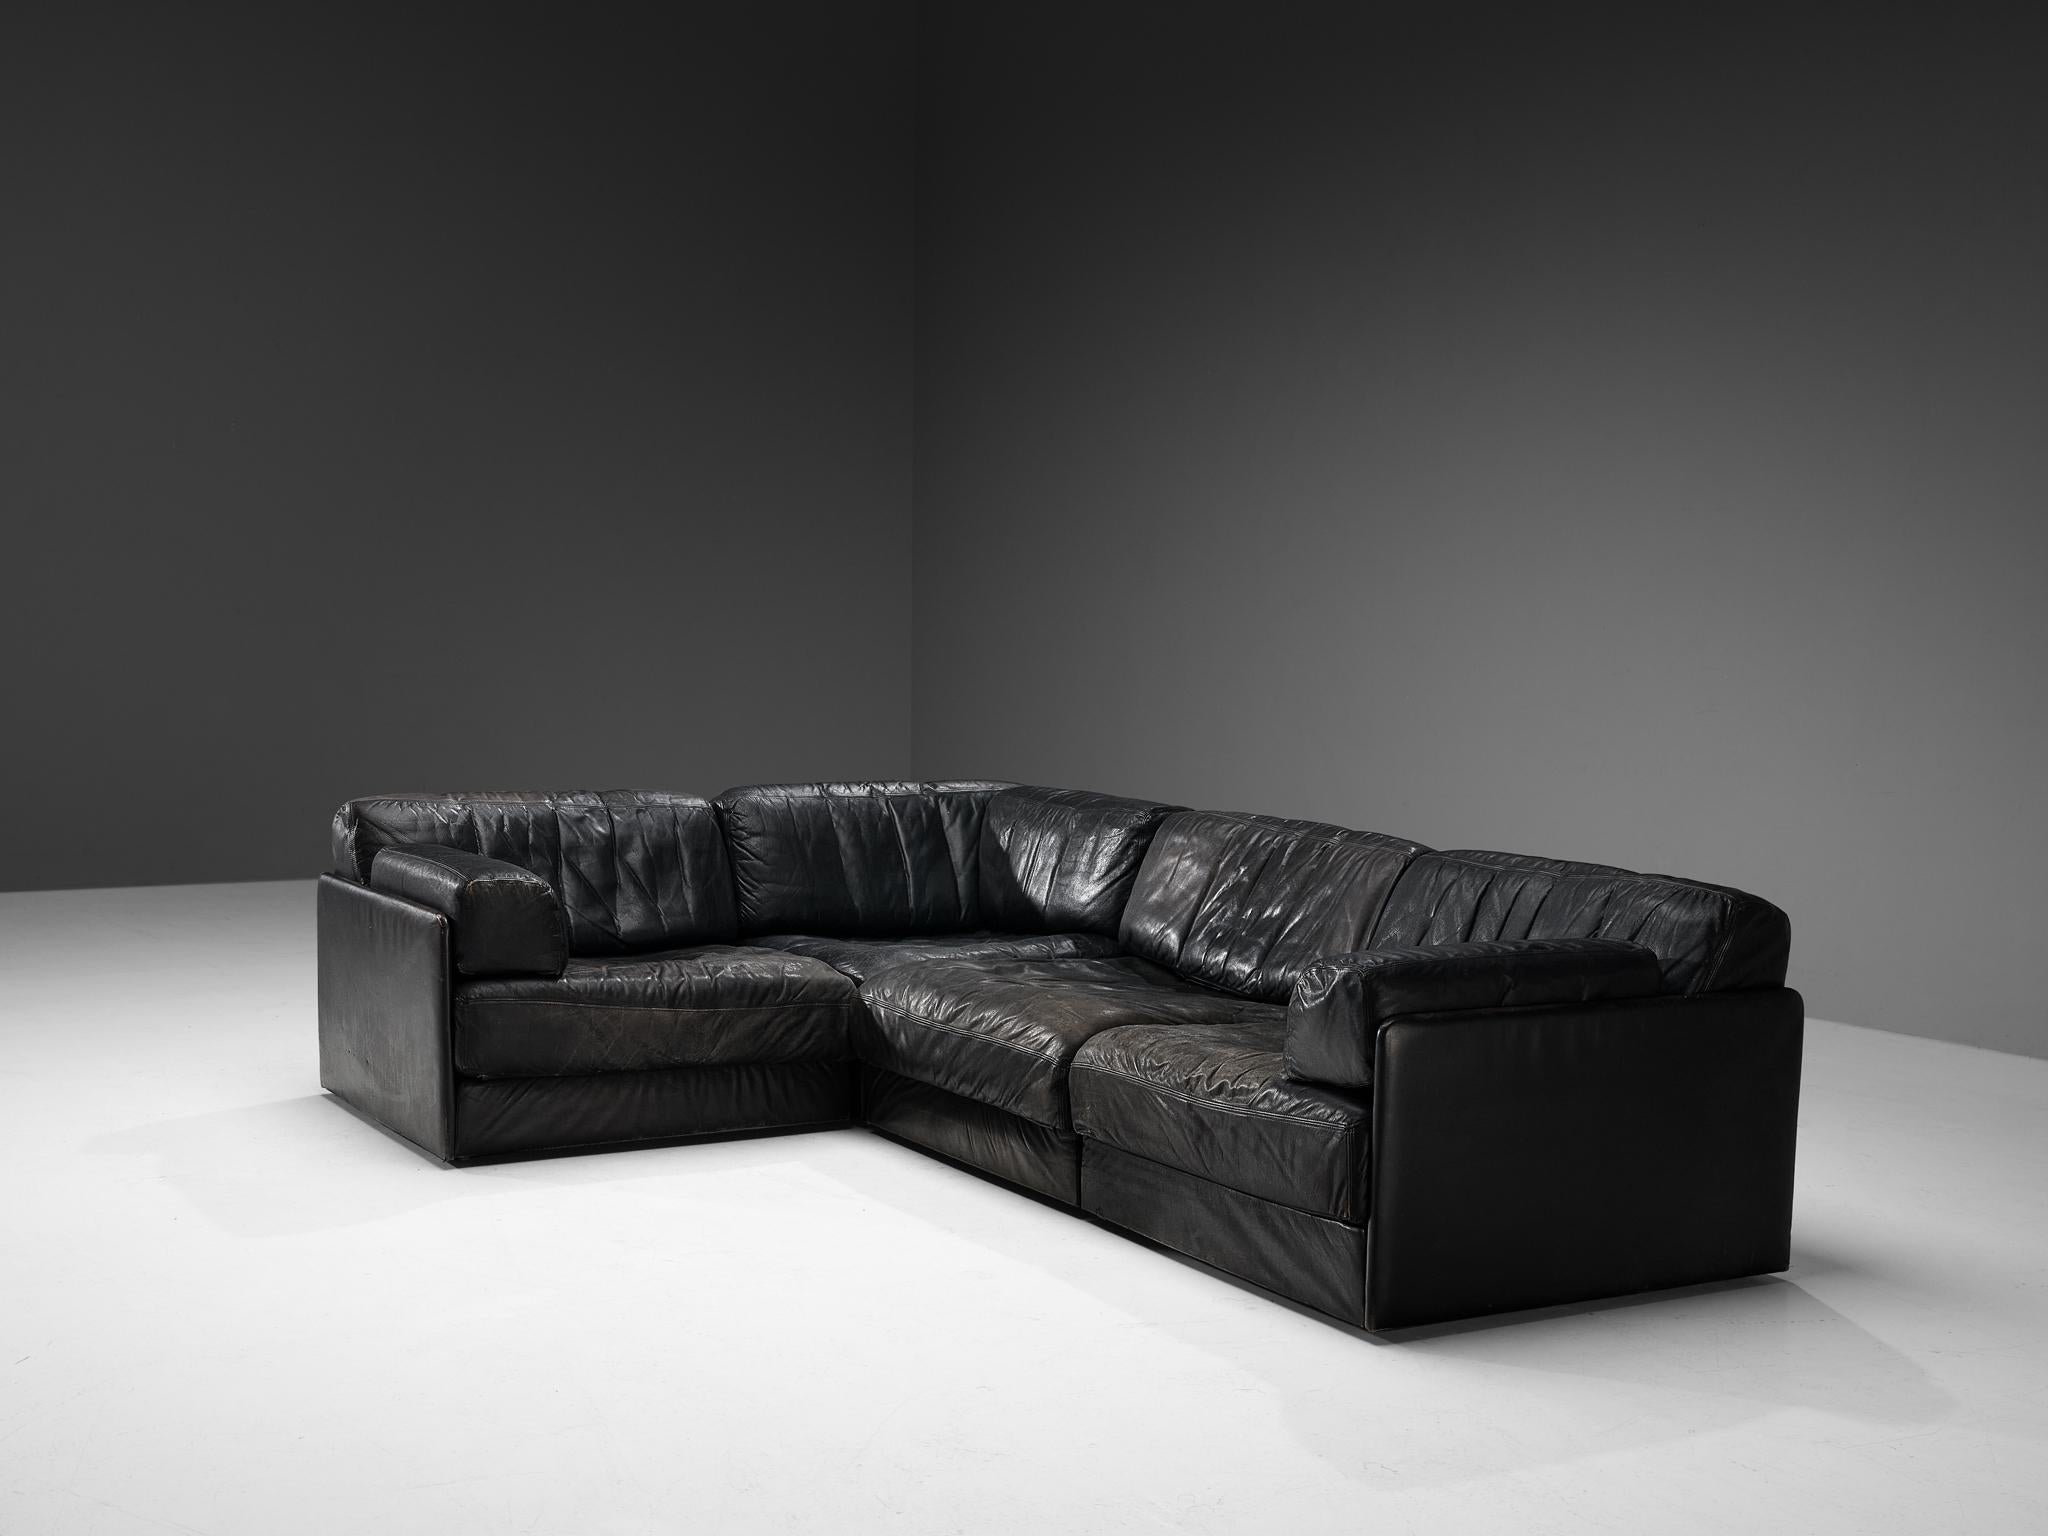 Late 20th Century De Sede Sectional Sofa ‘DS-76’ in Black Leather